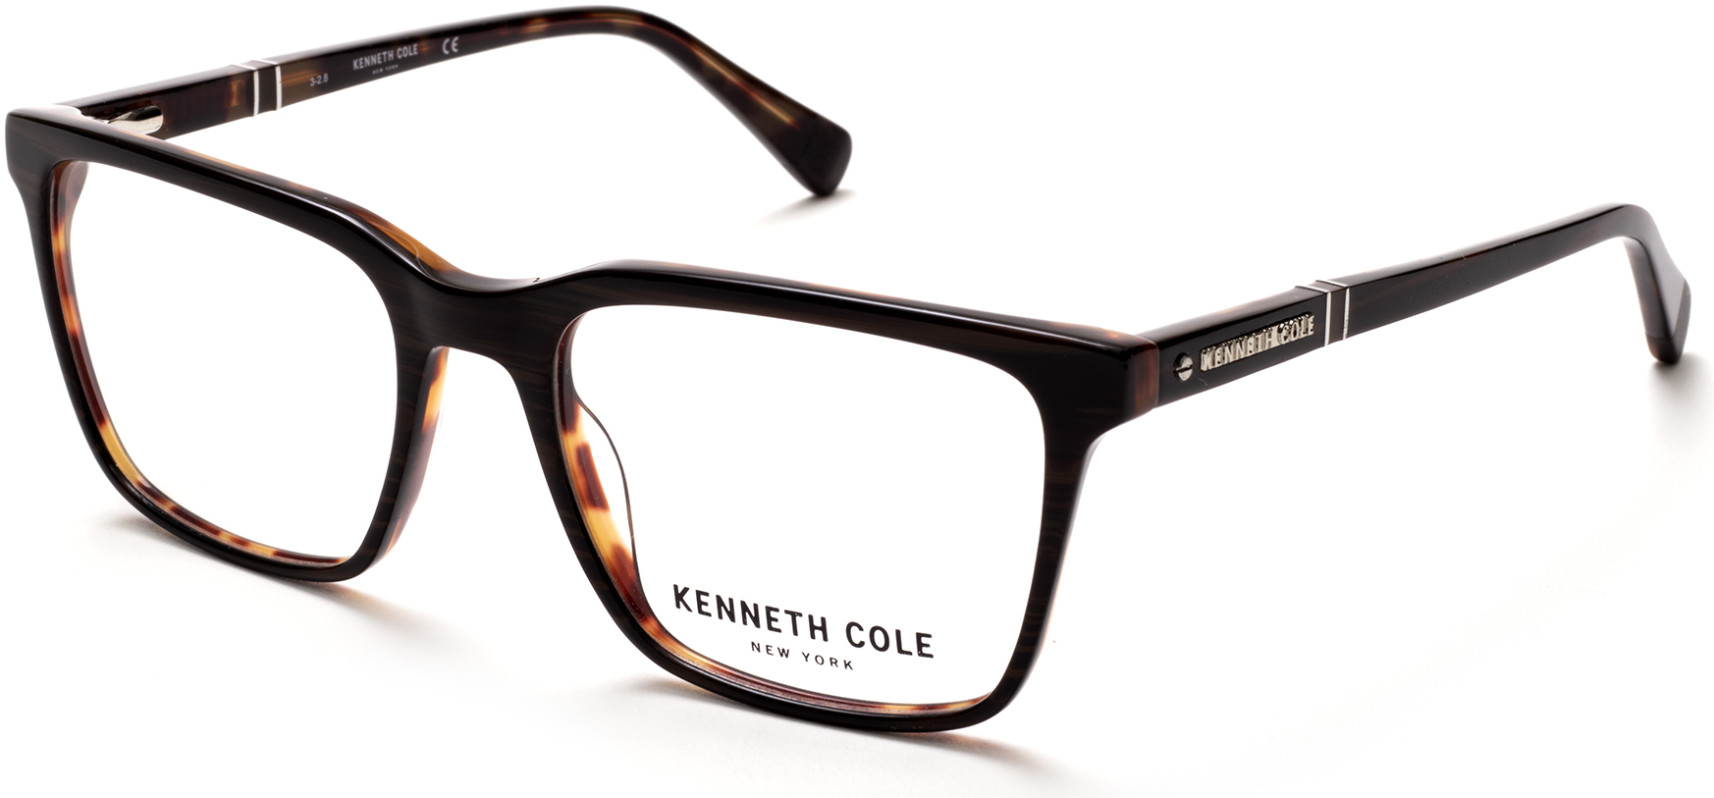 KENNETH COLE NY 0290 062